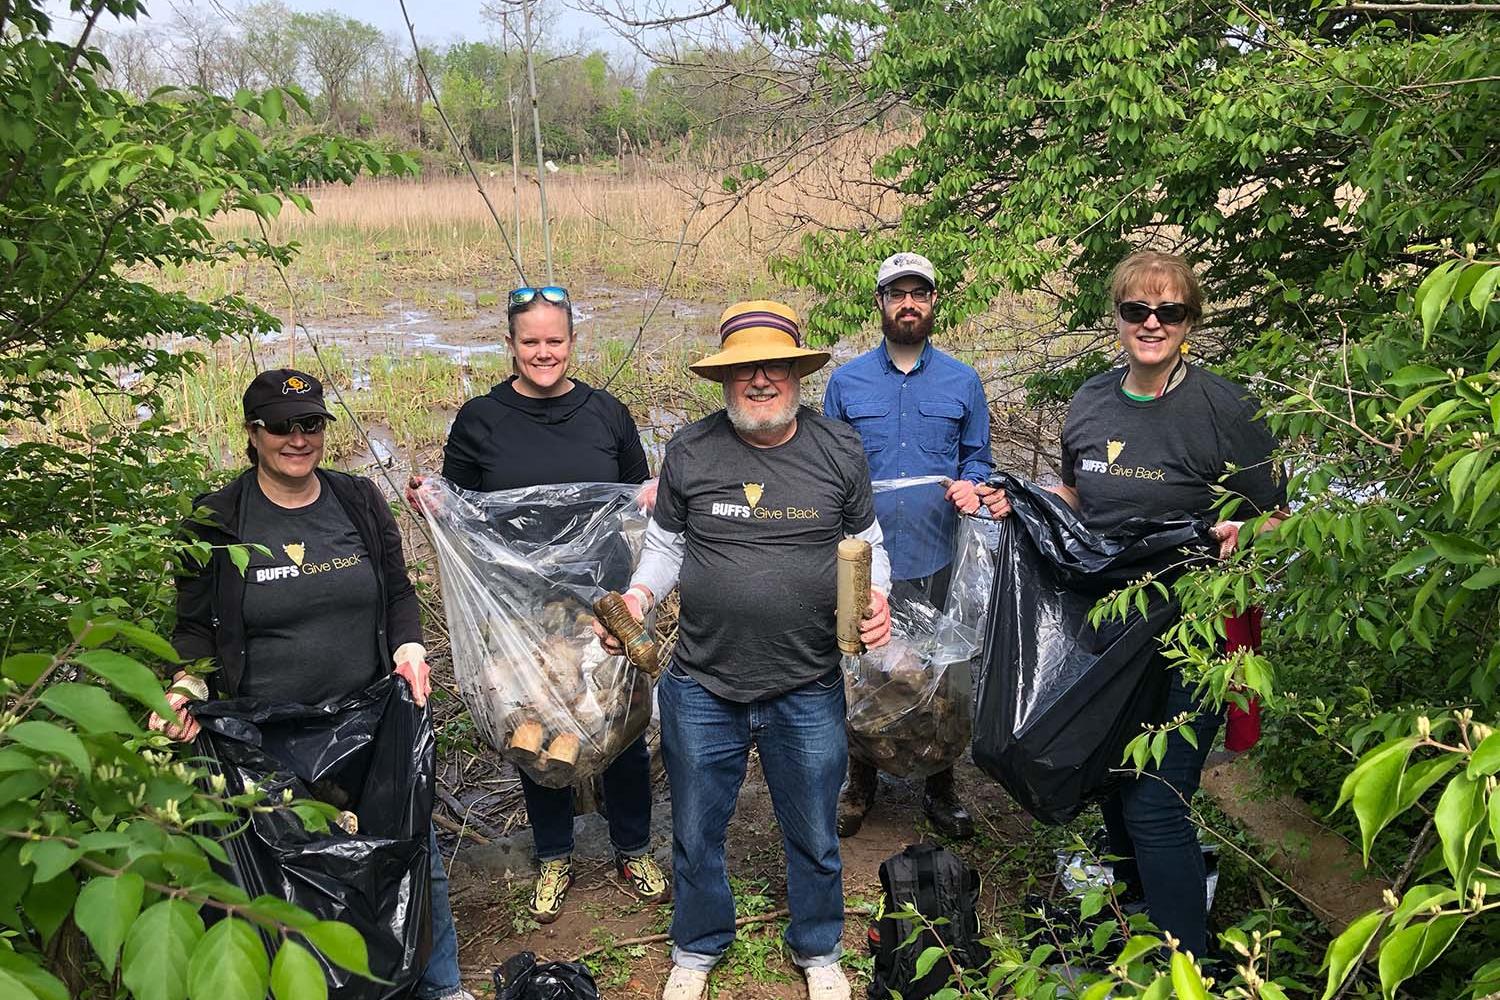 Forever Buffs cleaning up the Anacostia watershed in Washington DC 